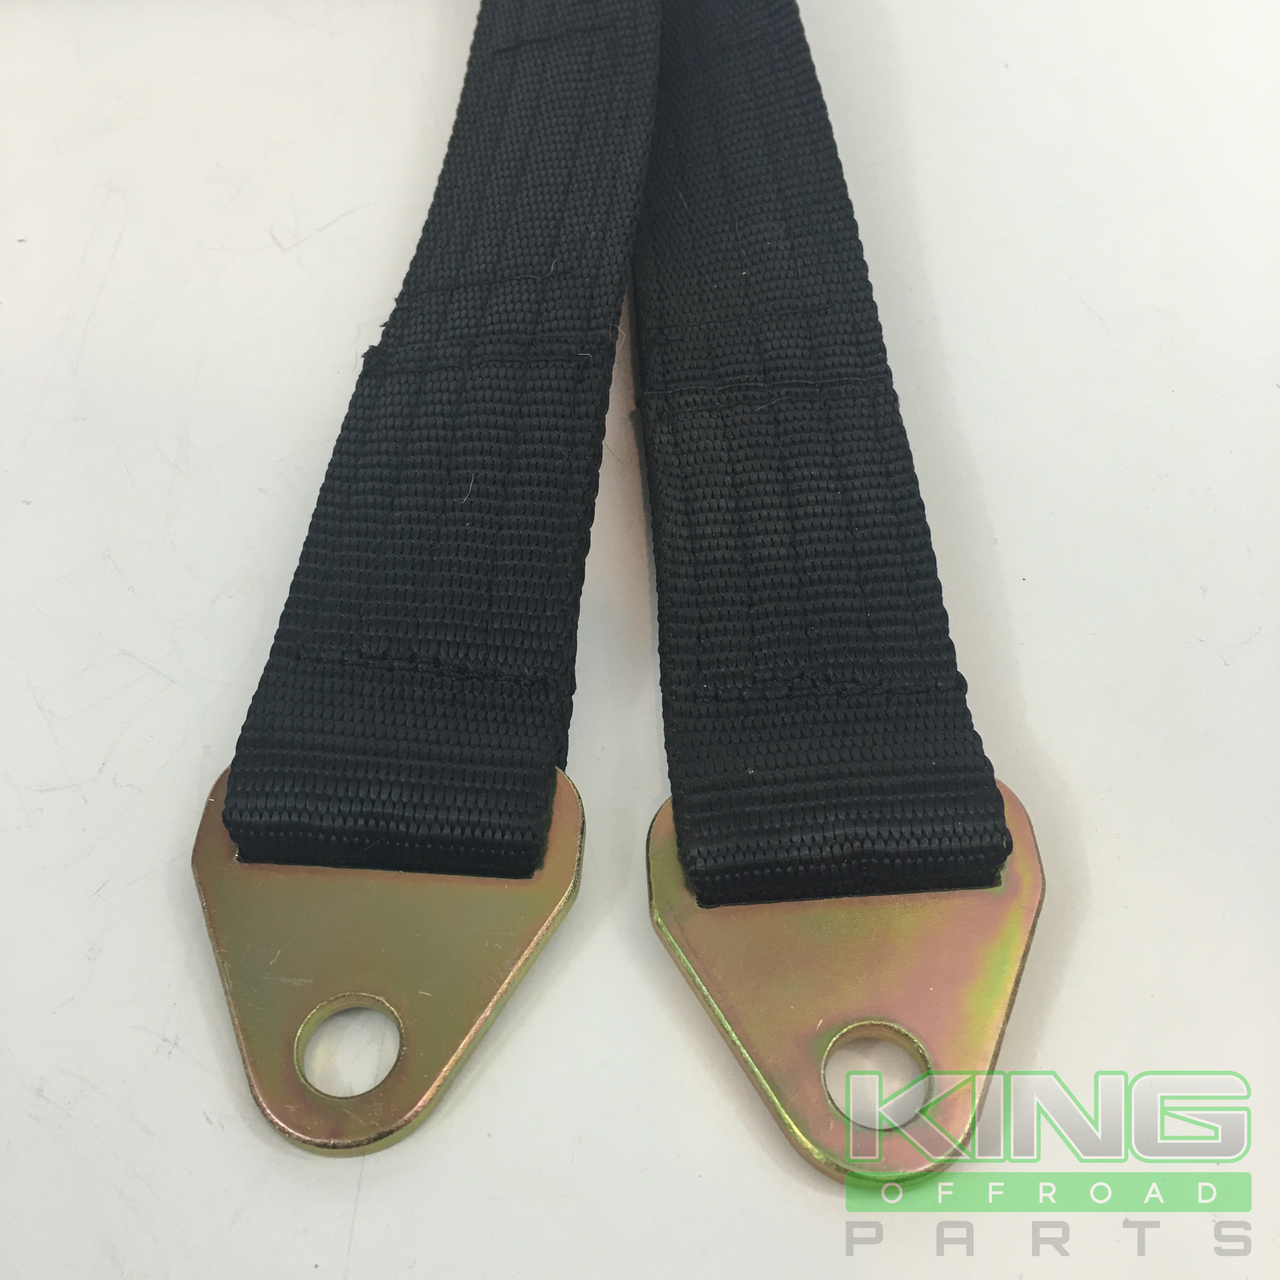 4 PLY LIMIT STRAPS 14" LONG - King Off Road Parts